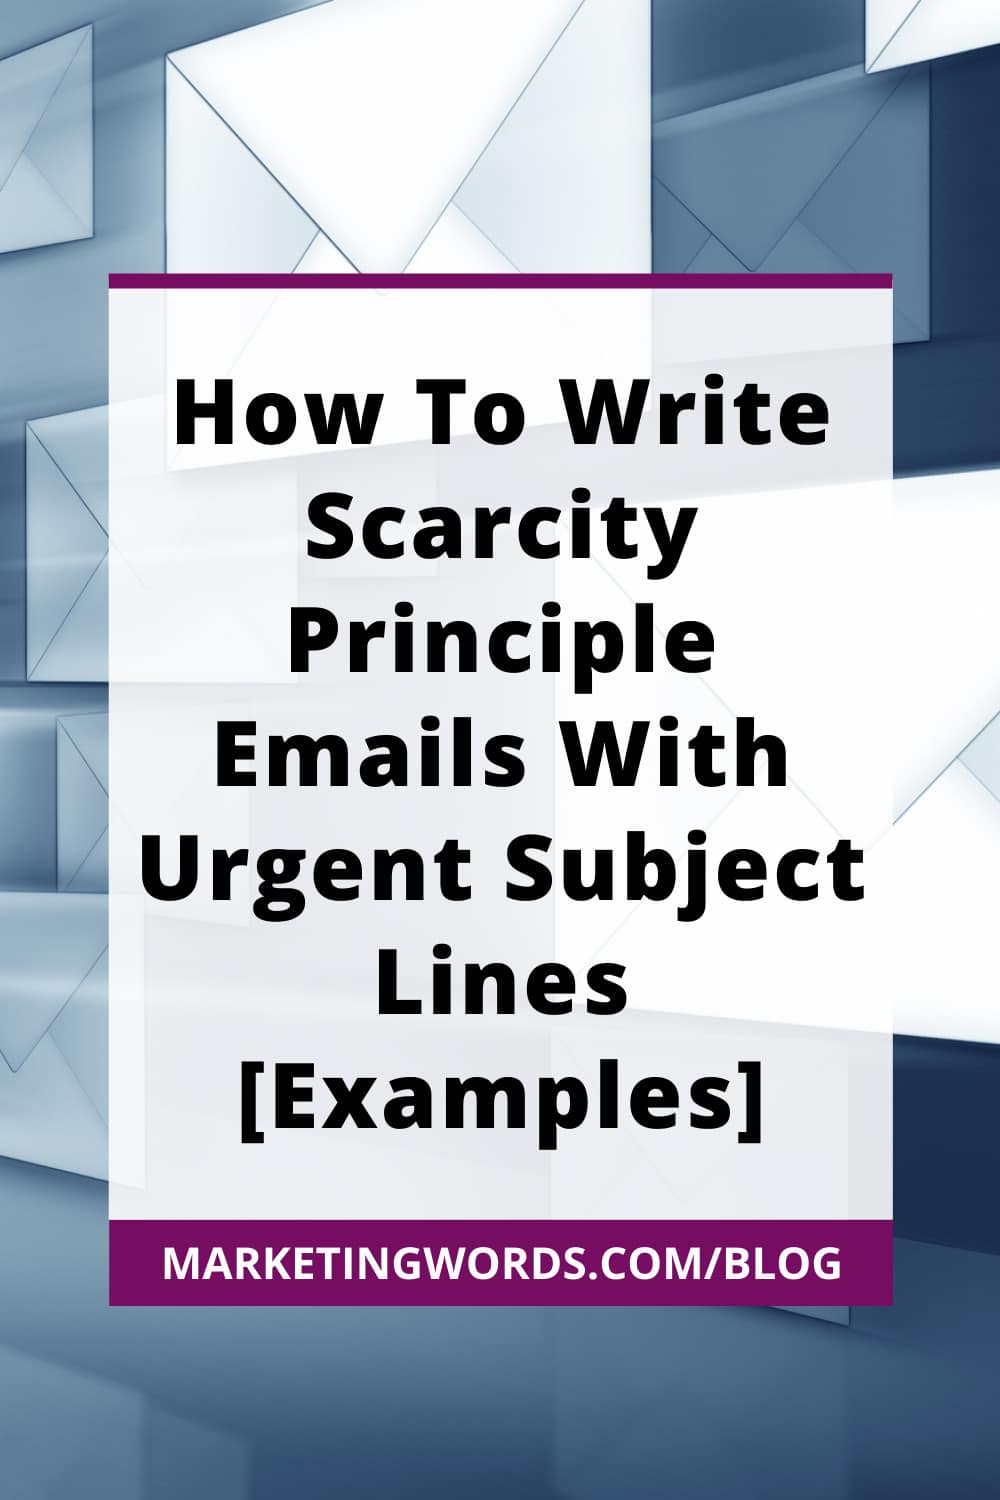 How To Write Scarcity Principle Emails With Urgent Subject Lines [Examples]